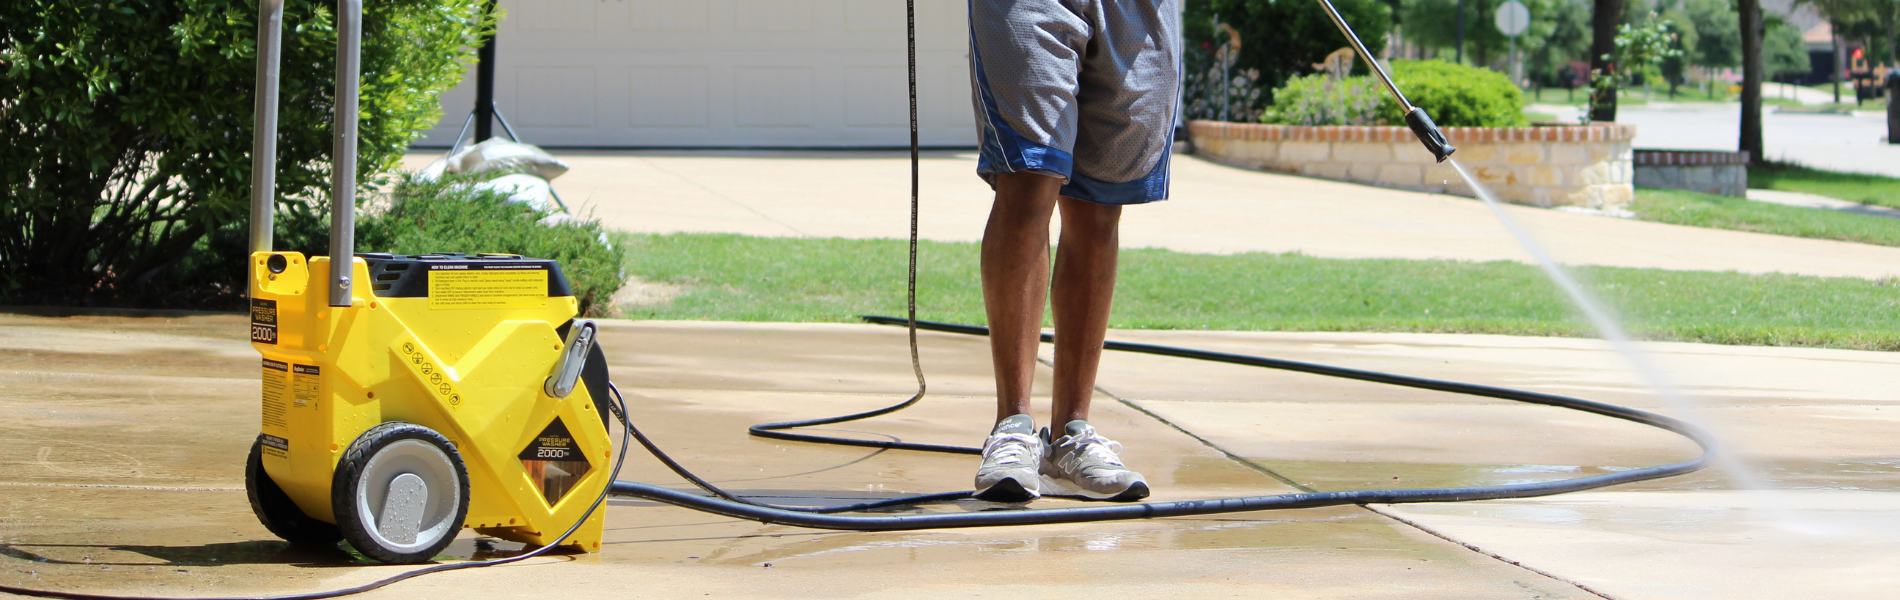 Using the RugDoctor pressure washer to clean the driveway